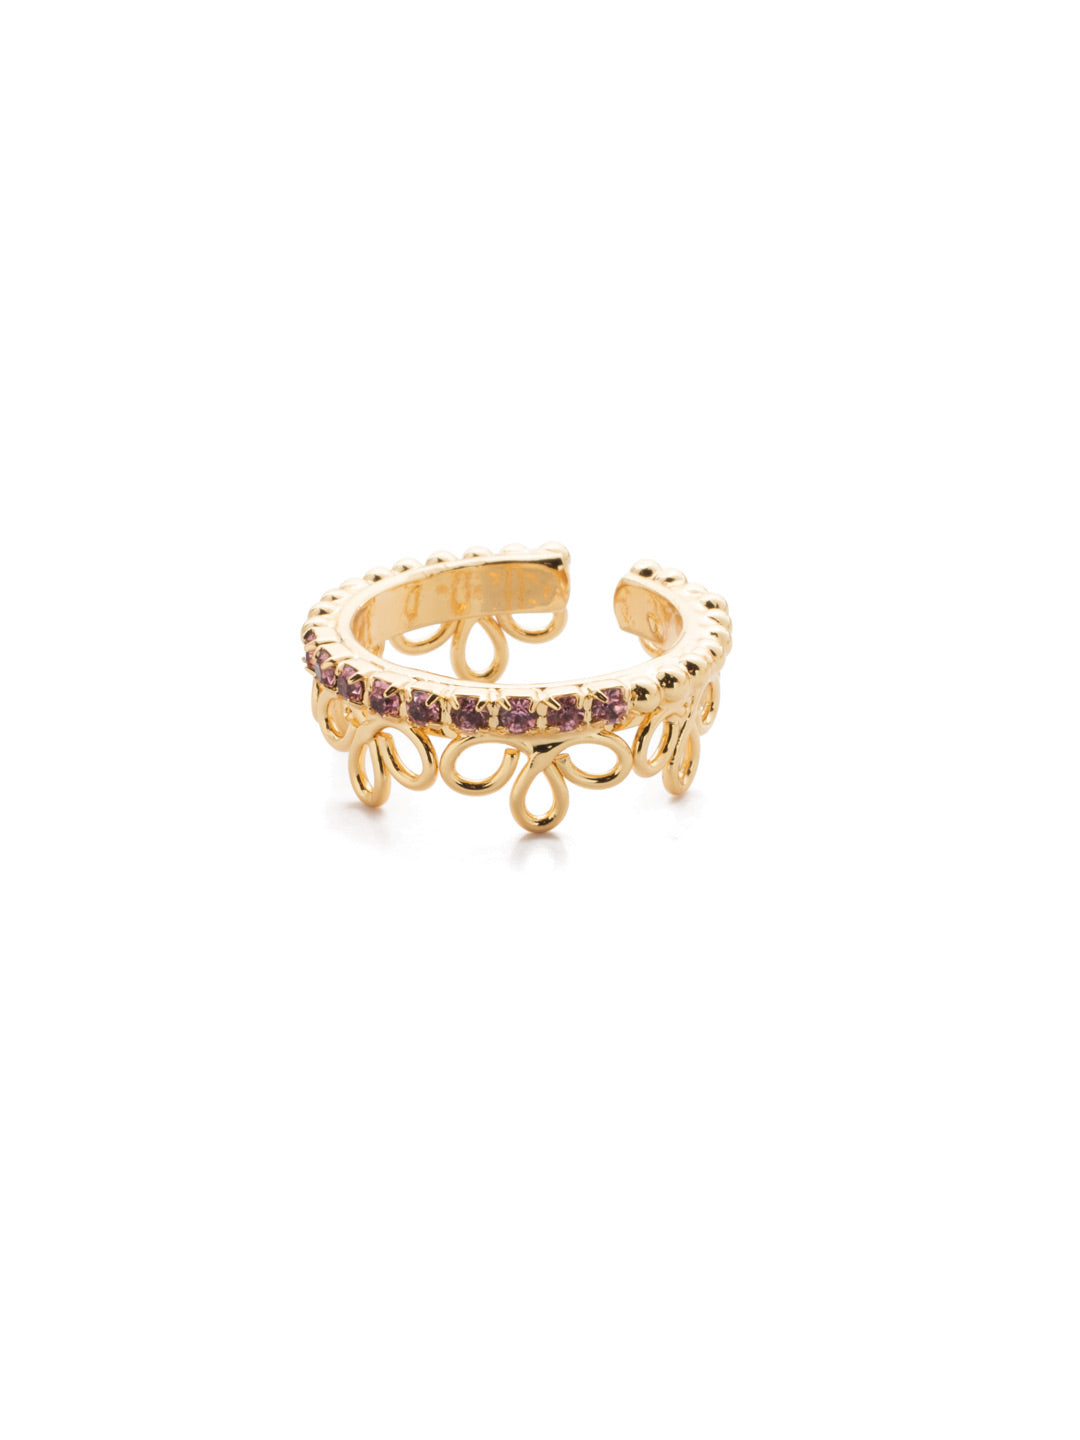 Prunella Band Ring - RES13BGBGA - <p>Slip the Prunella Band Ring on the finger of your choice and you're sure to be notice with its delicate hand-soldered metalwork outlined in stunning, sparkling crystals. From Sorrelli's Begonia collection in our Bright Gold-tone finish.</p>